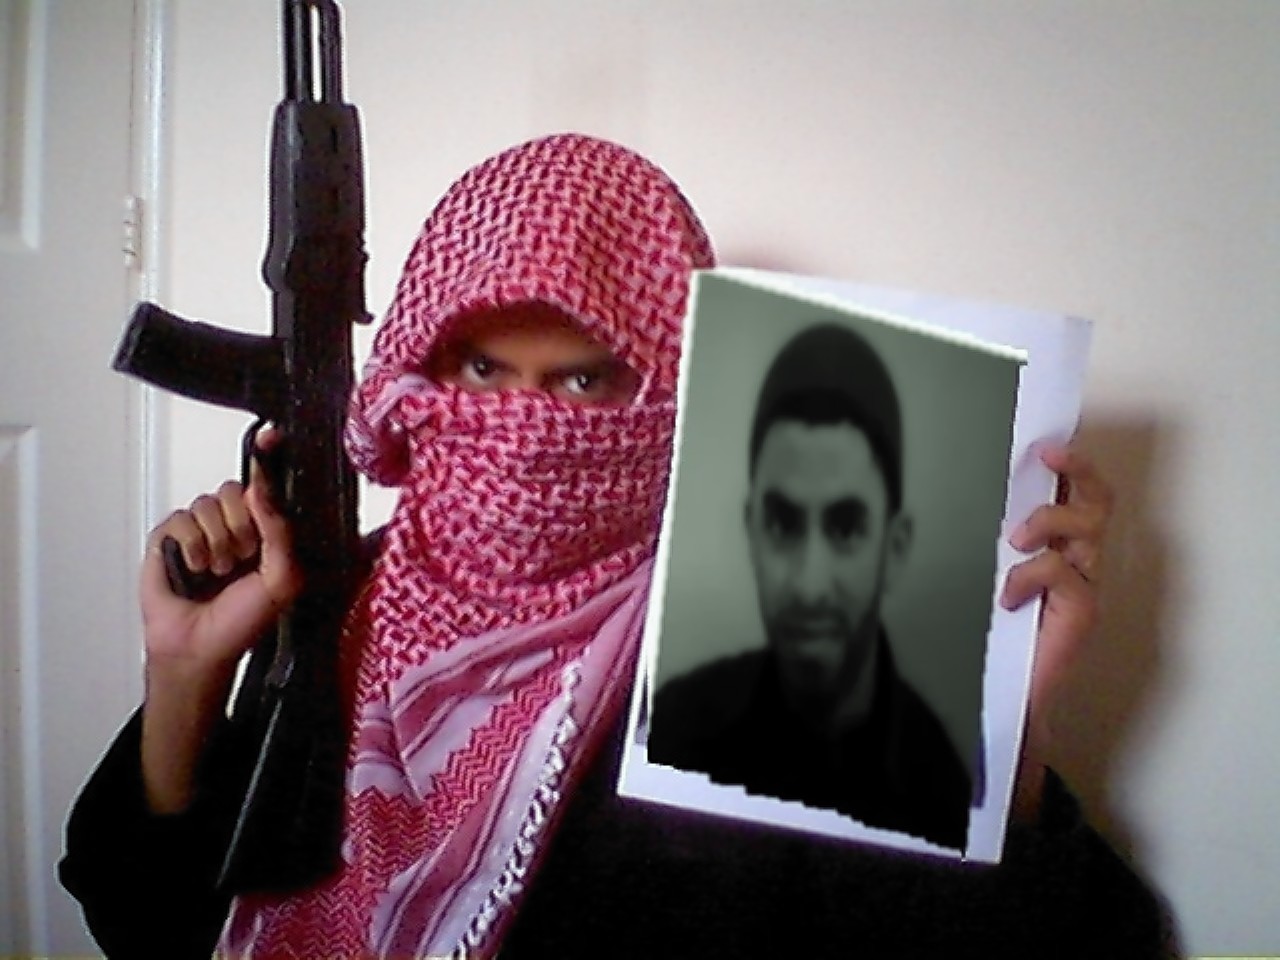 One of the photos taken by Yousif Badri of himself shown as evidence in court